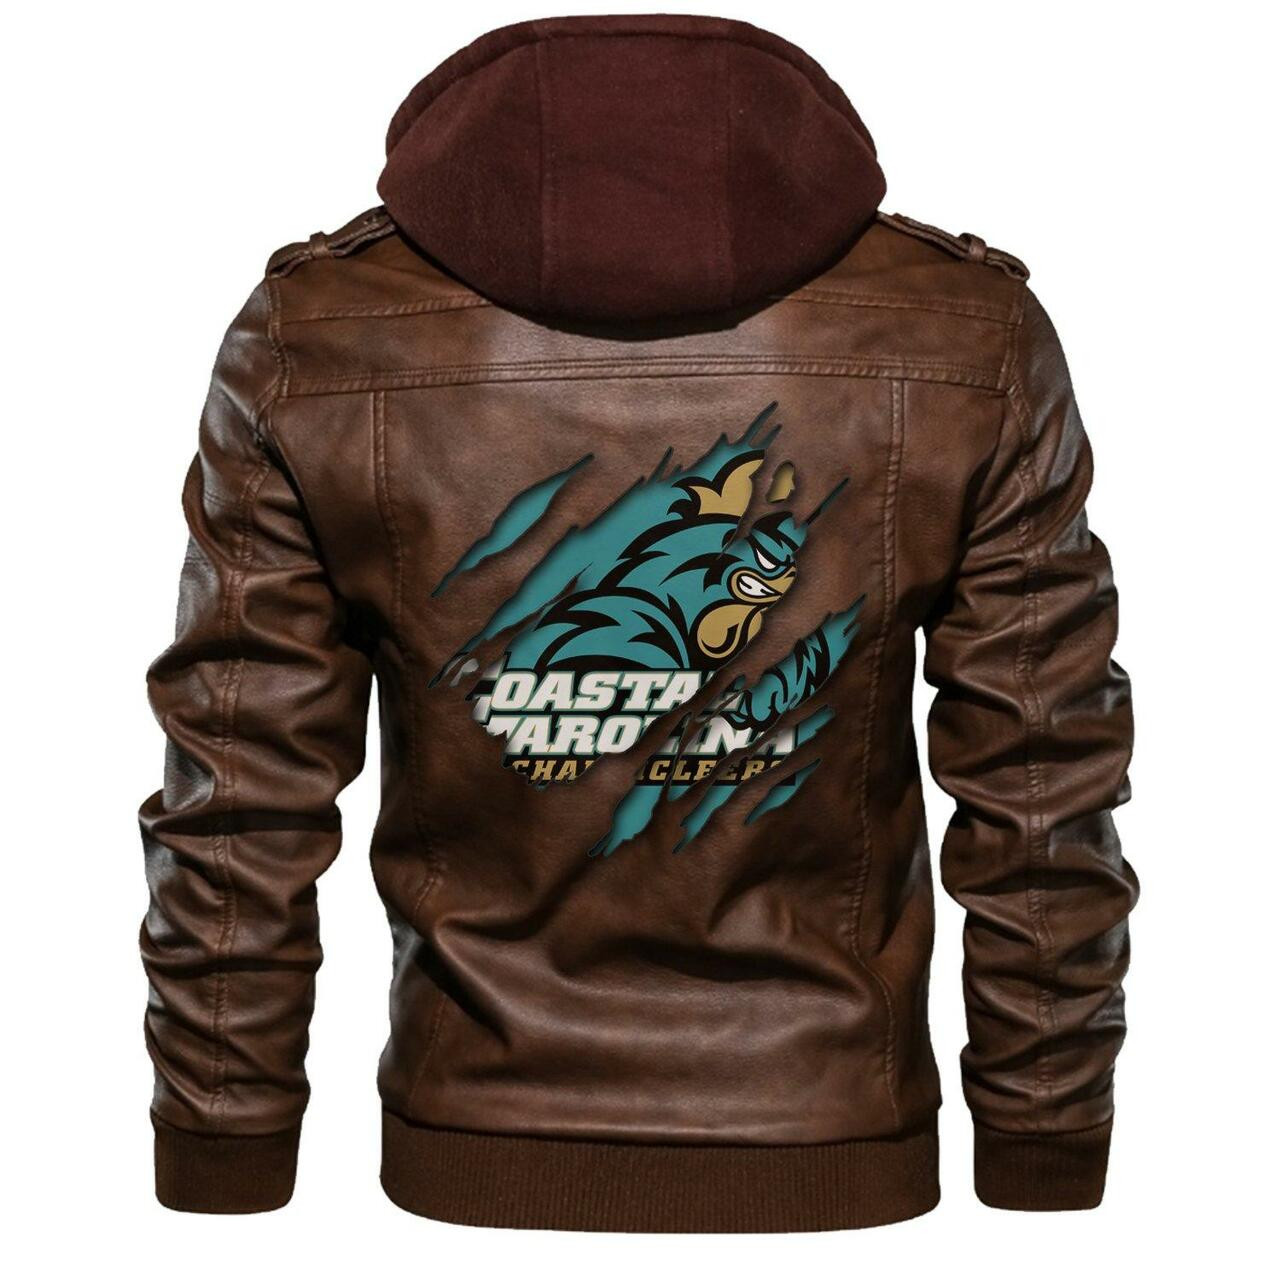 These Leather Jacket are popular options for Winter 325